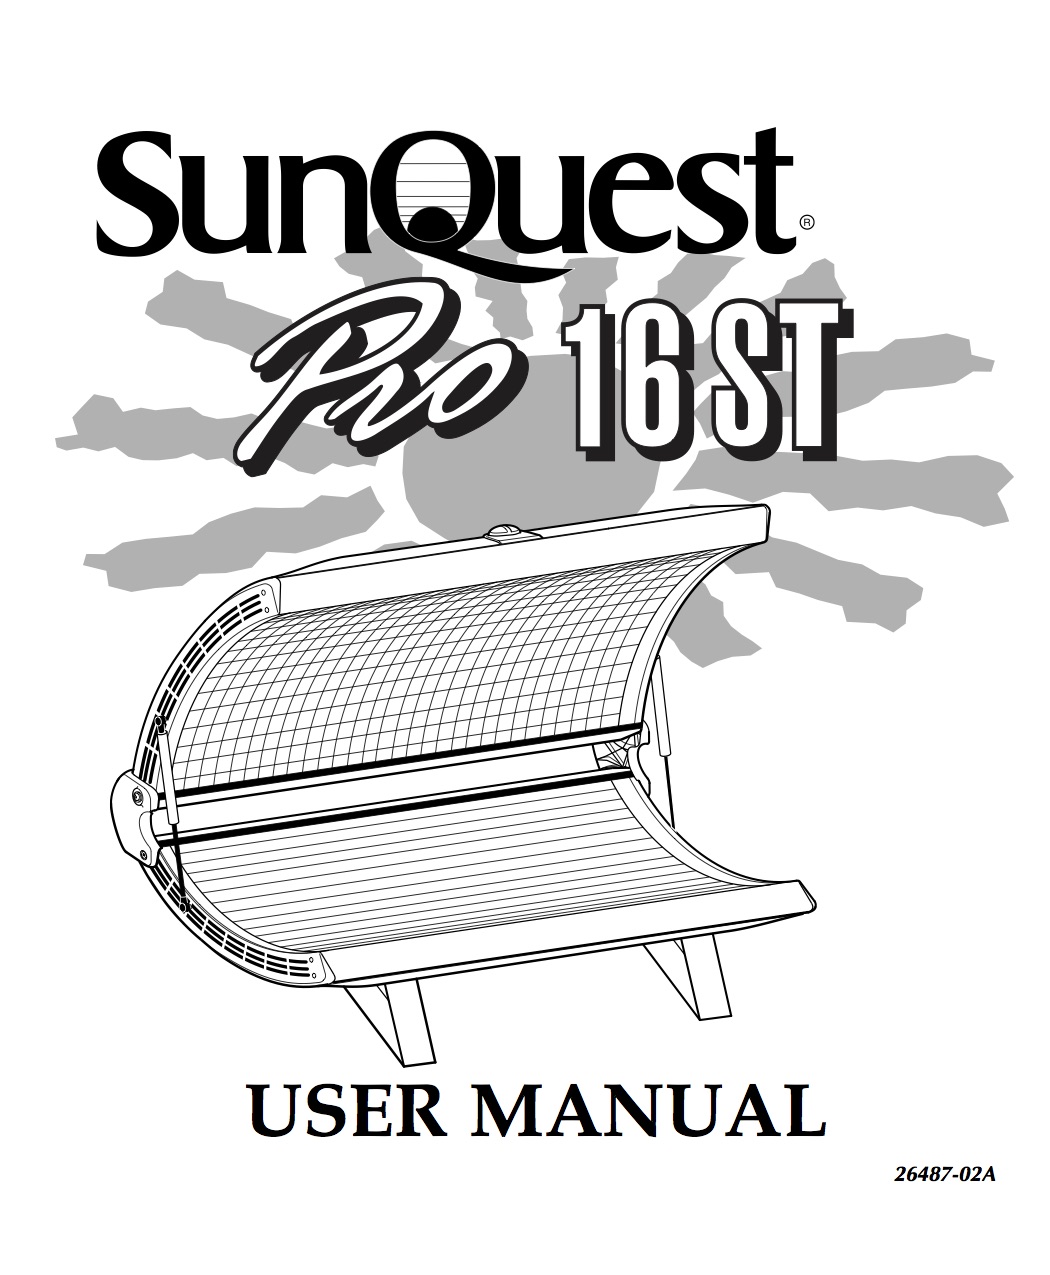 sunquest tanning bed parts break down